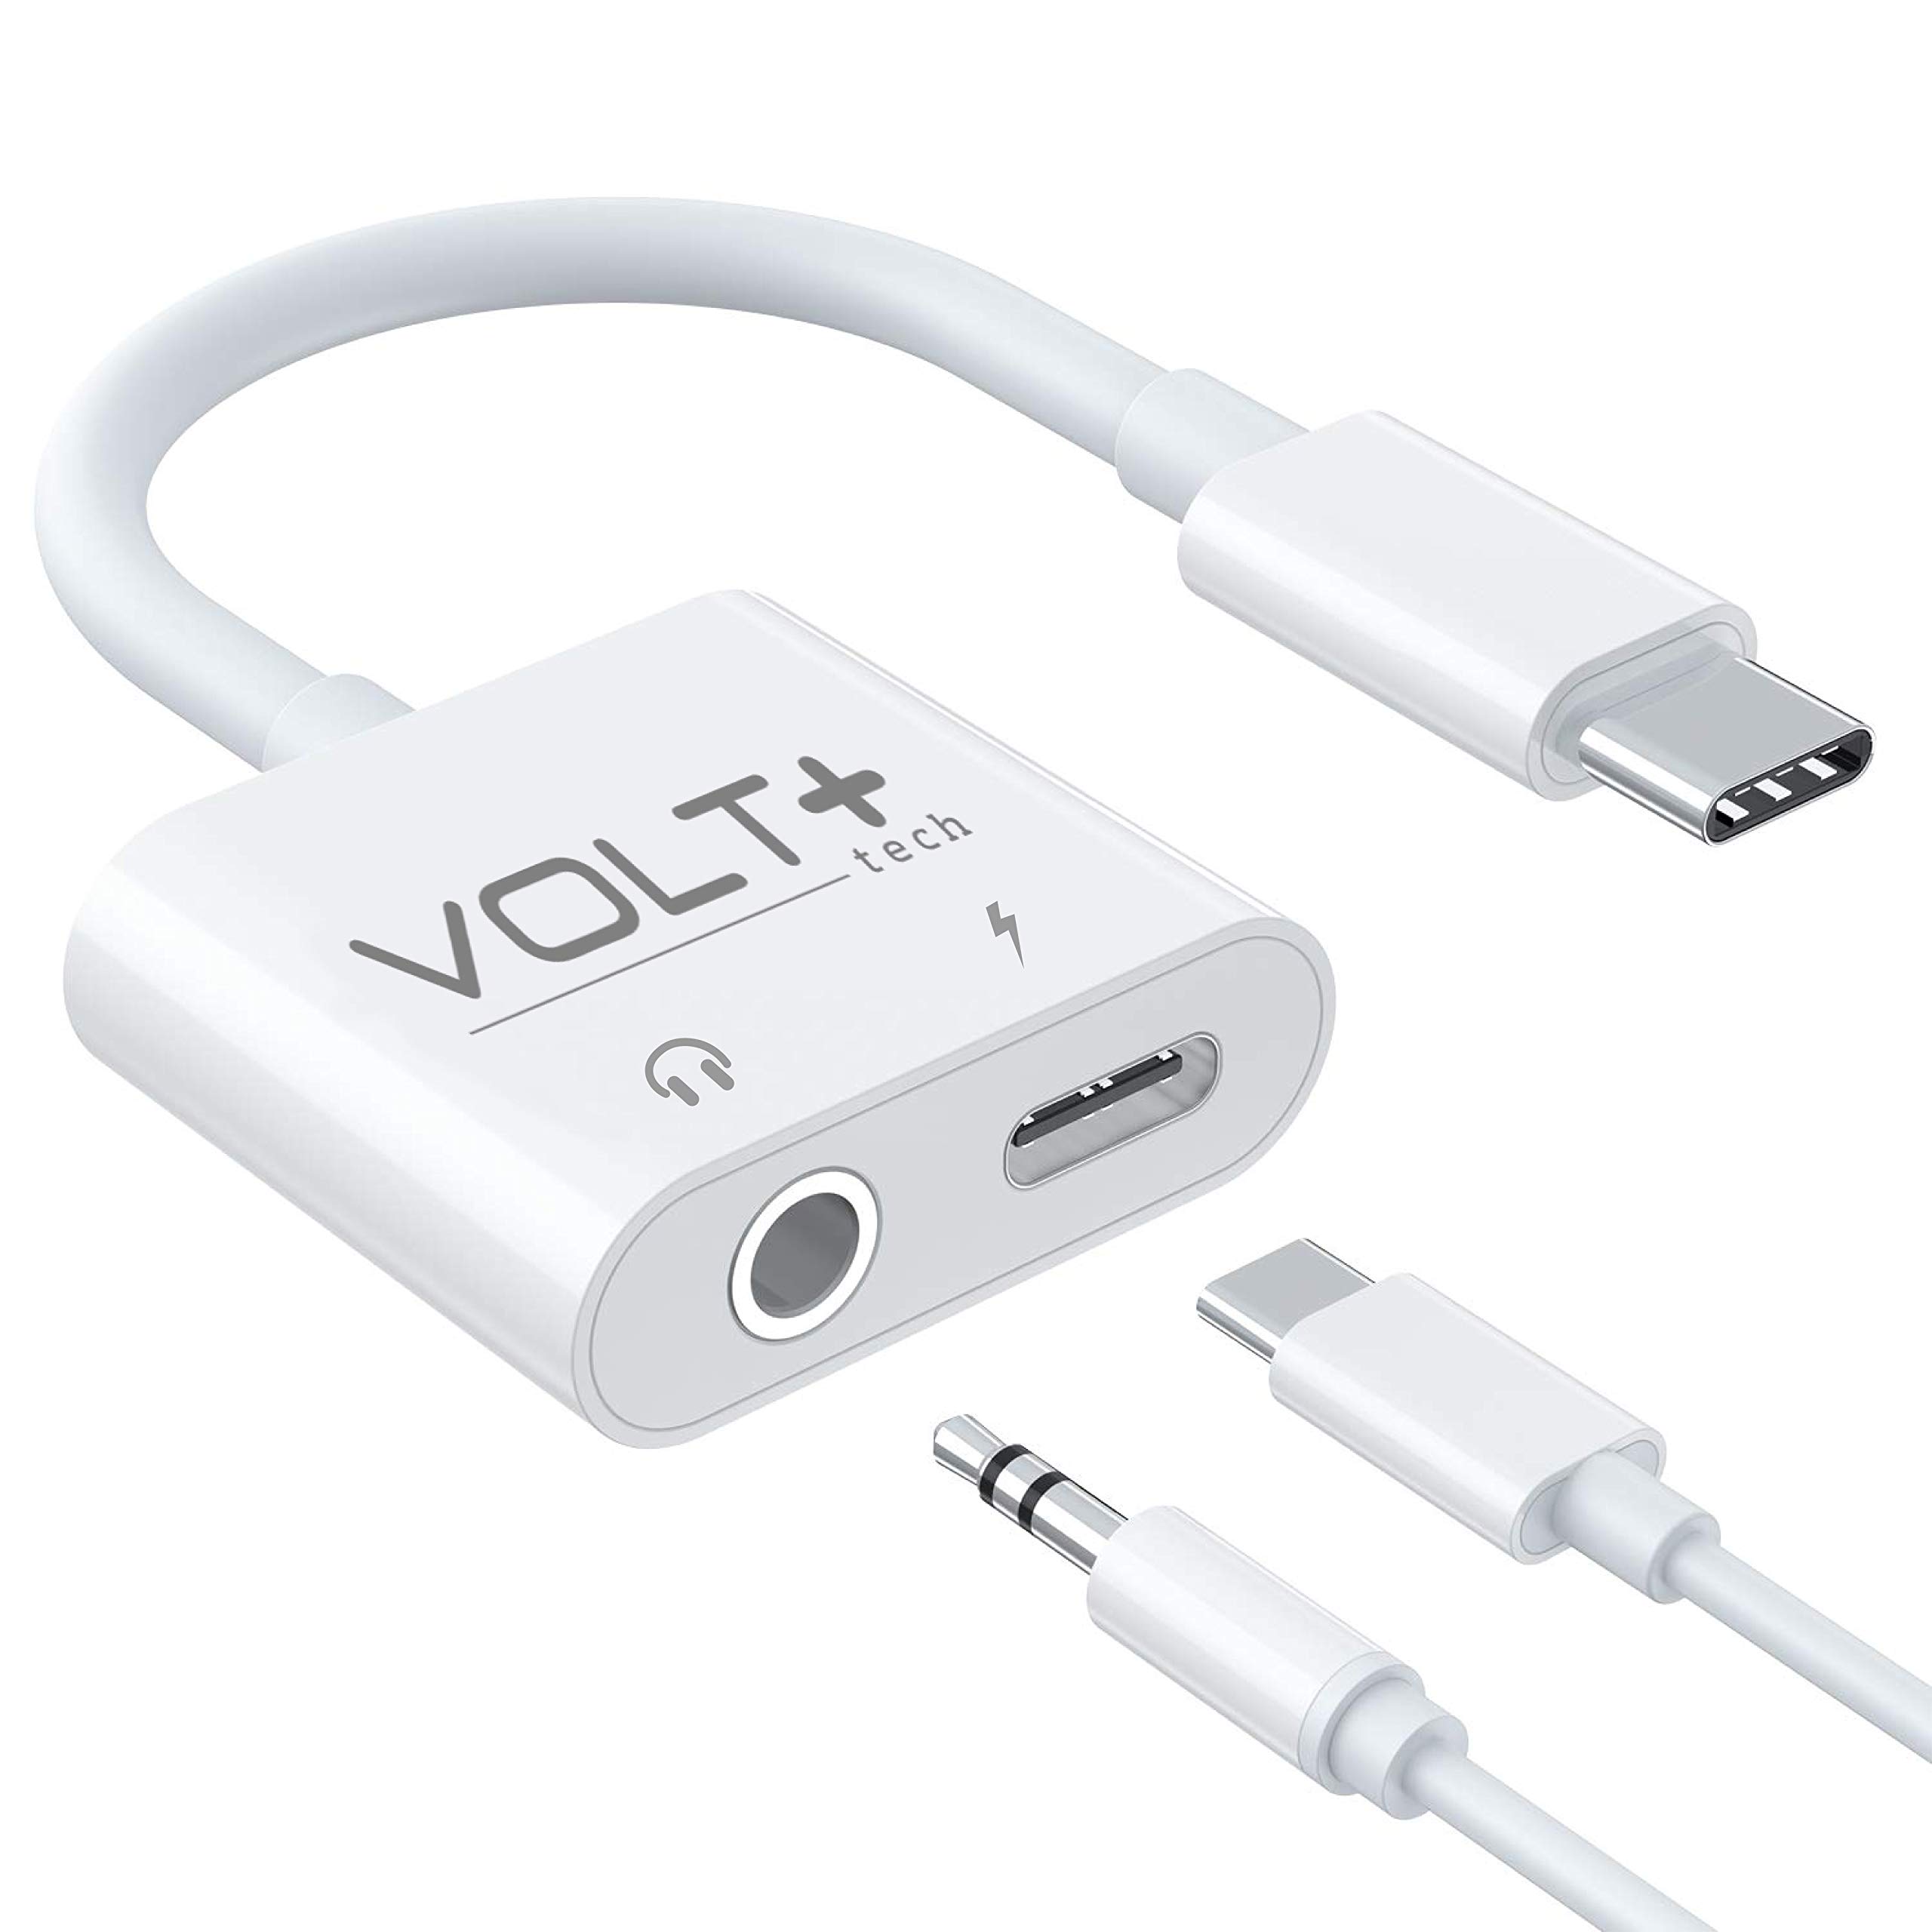 VOLT PLUS TECH USB C to 3.5mm Headphone Jack Audio Aux & C-Type Fast Charging Adapter Compatible with Samsung Galaxy Tab S7/S7+/S6/Lite/S5e/Plusand Many More Devices with C-Port